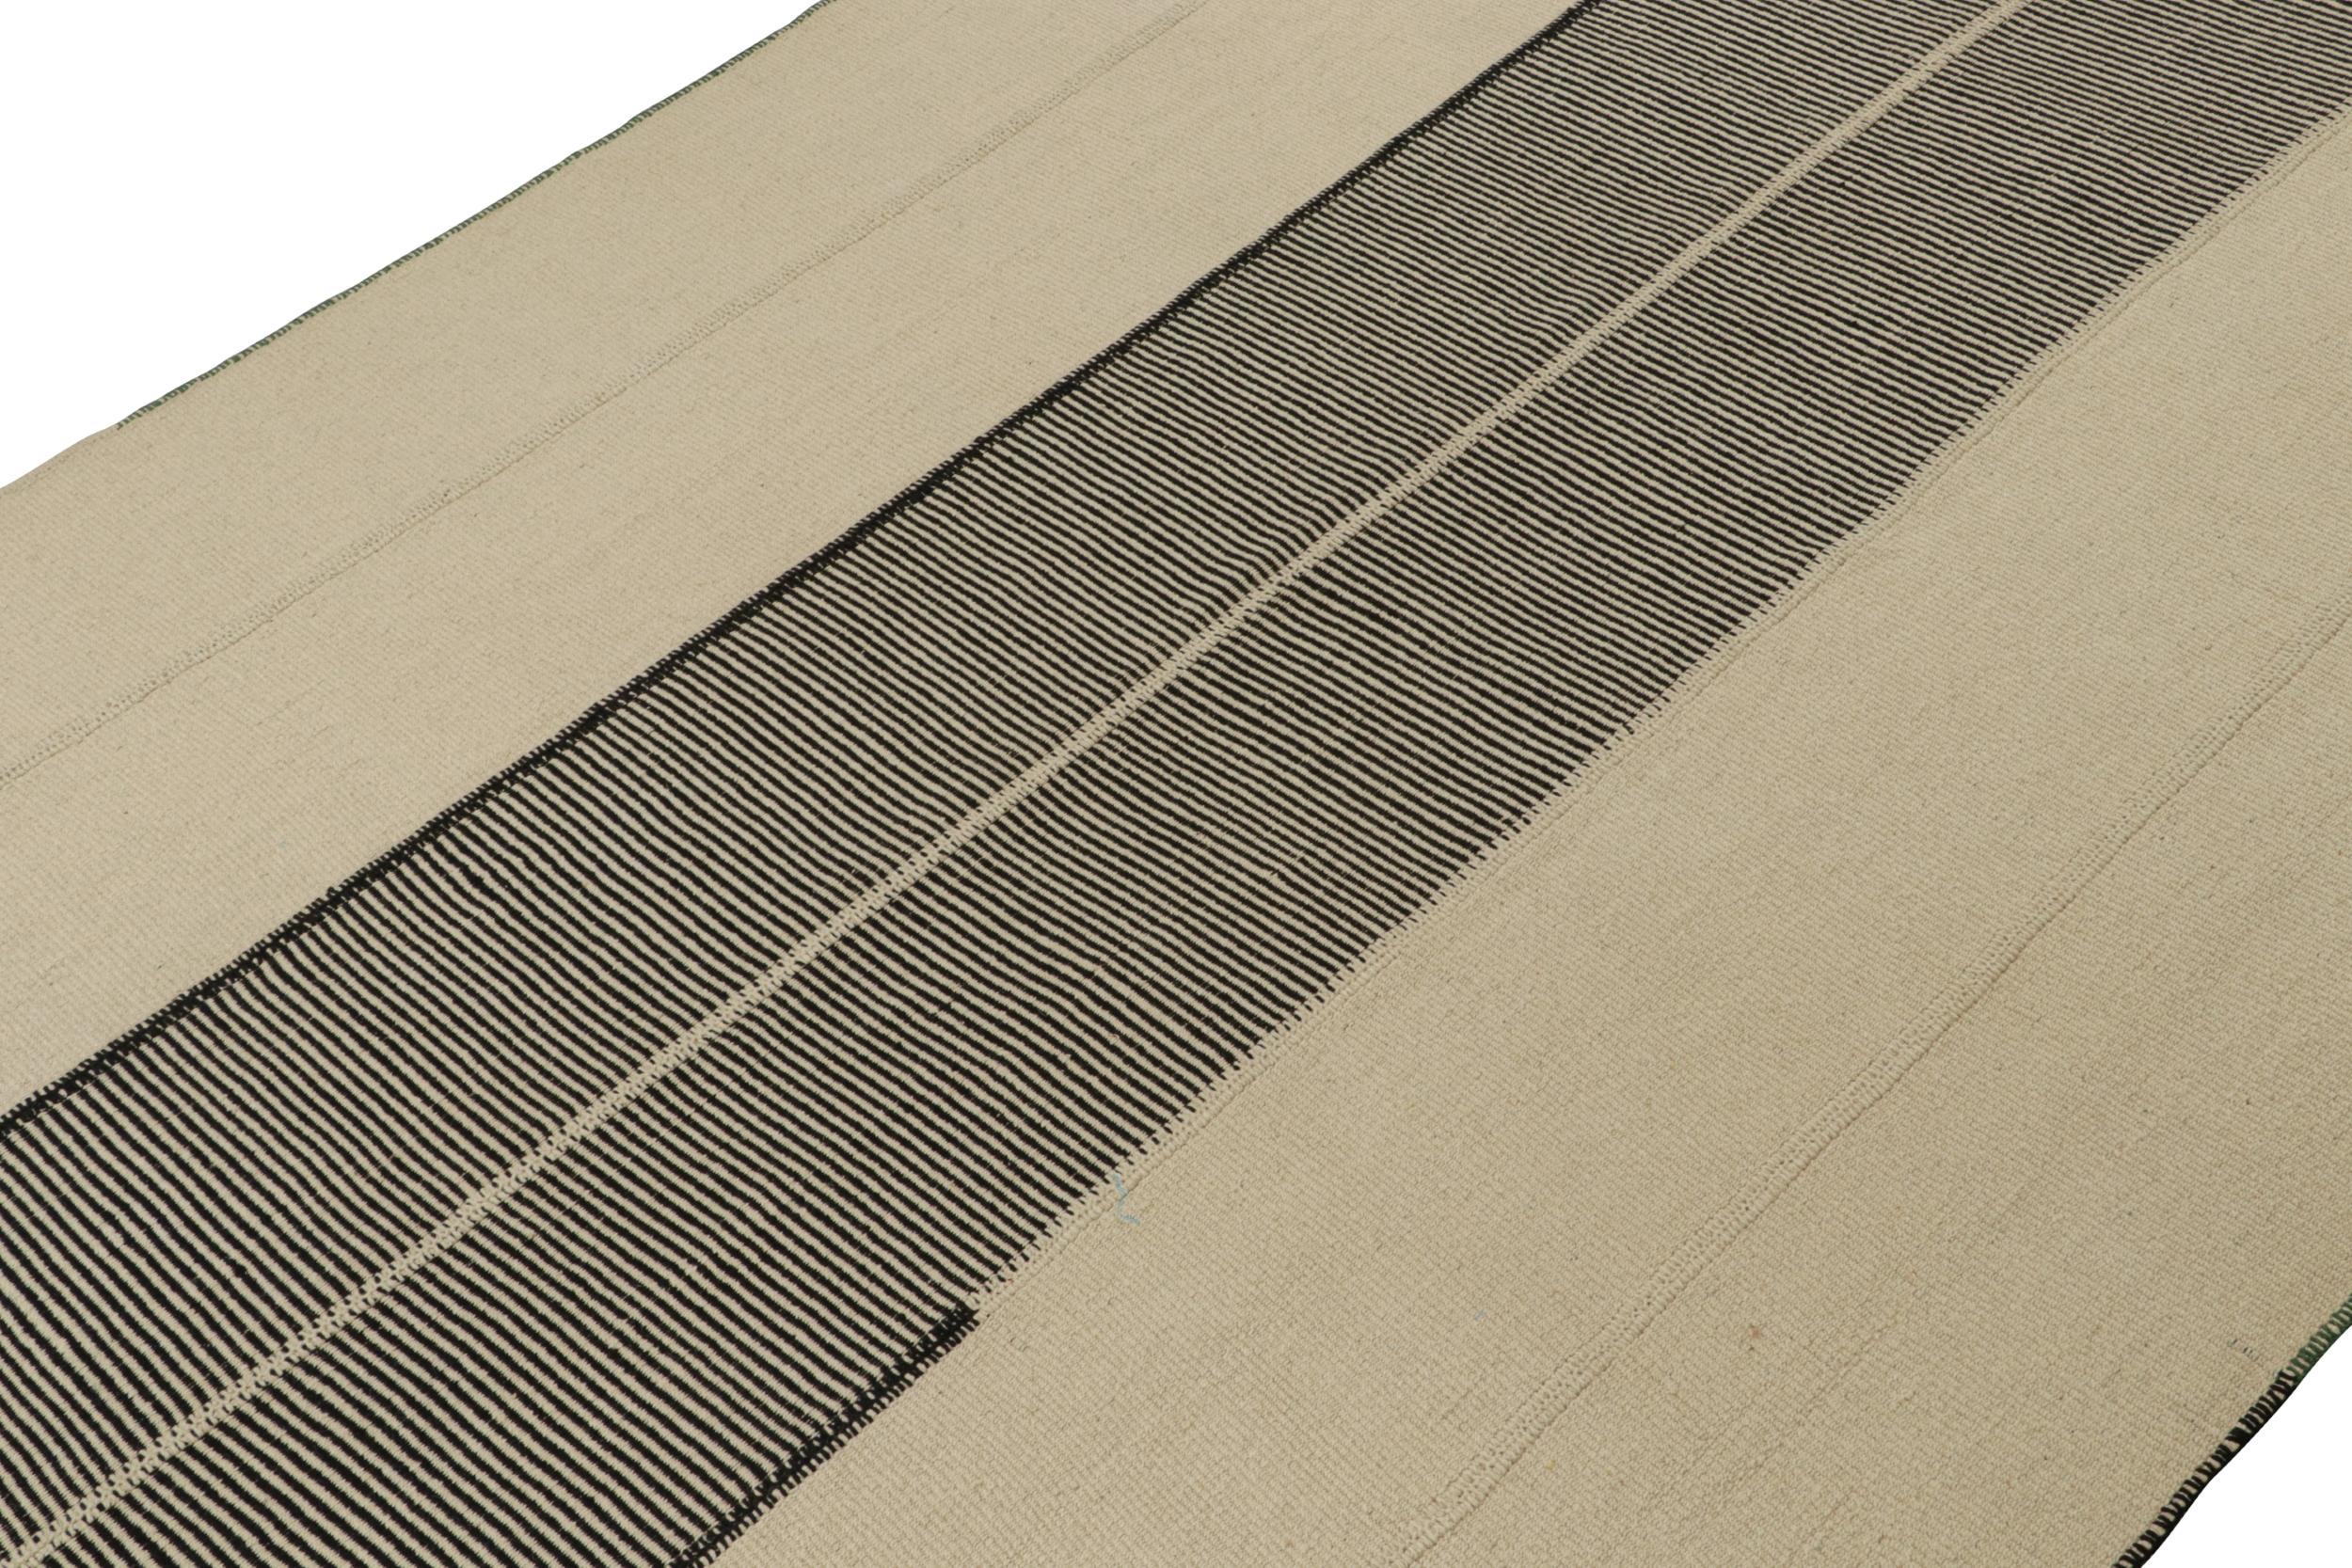 Handwoven in wool, a 10x14 Kilim from a bold new line of contemporary flatweaves by Rug & Kilim.

On the Design: 

Connoting a modern take on classic panel-weaving, our latest “Rez Kilim” enjoys beige and black tones. Keen eyes will admire how